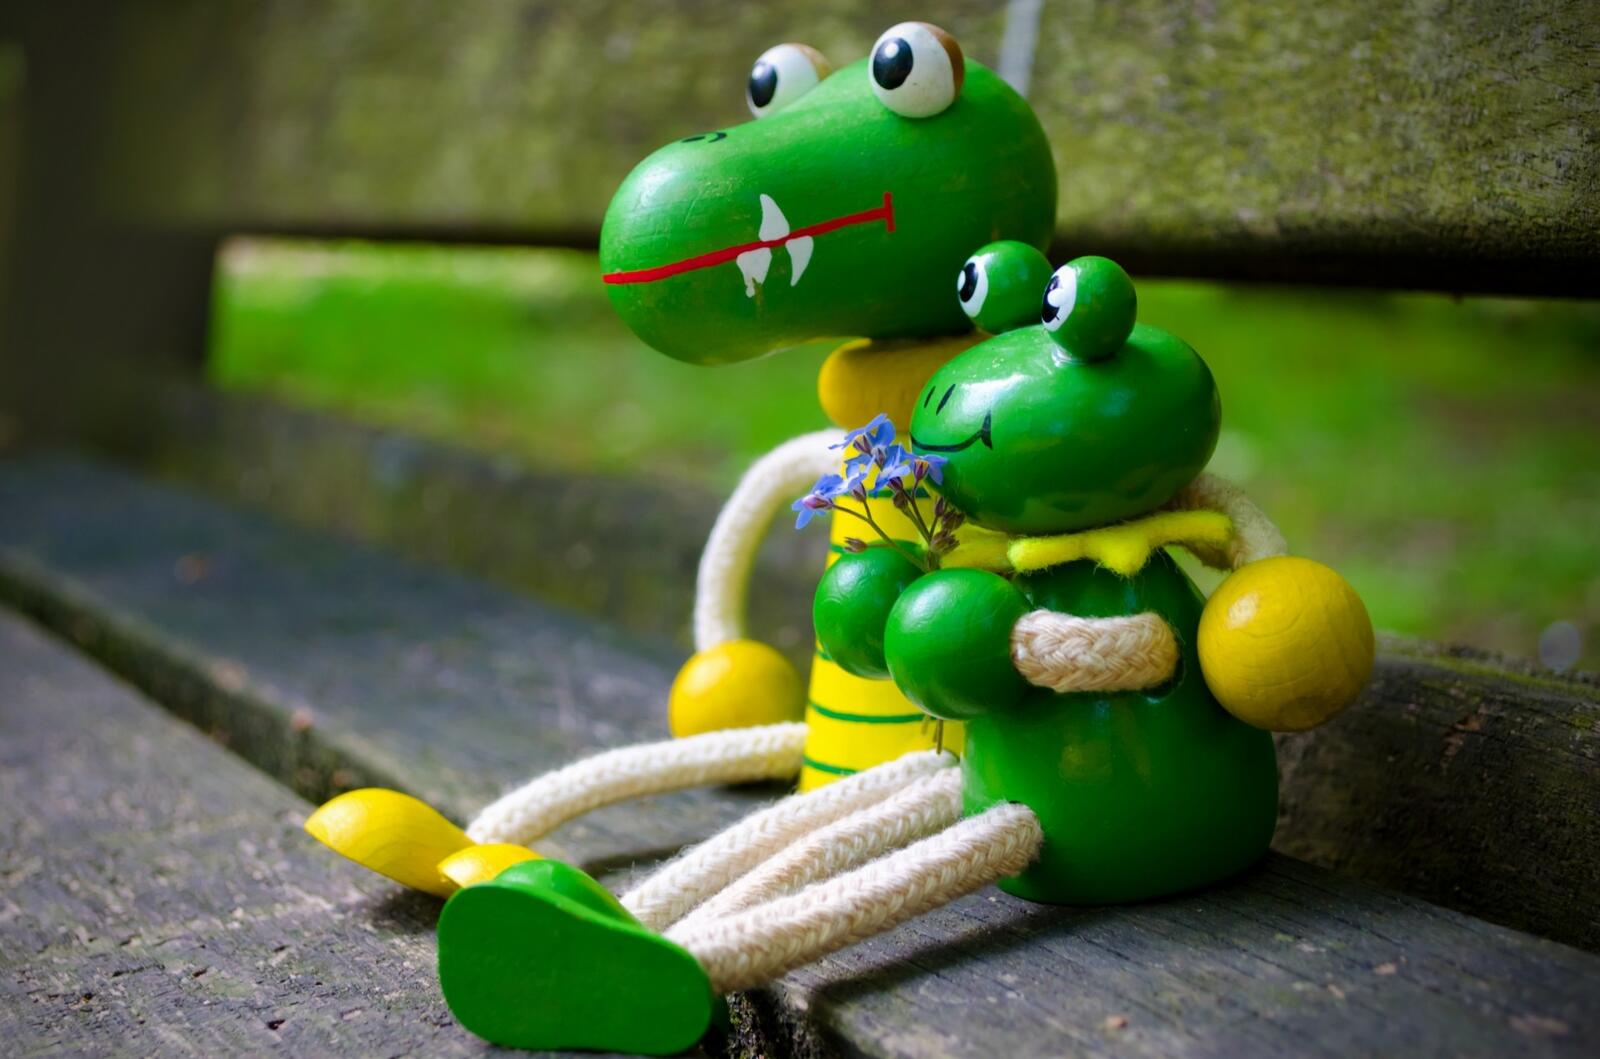 Wallpapers wooden figurines green frog toys on the desktop